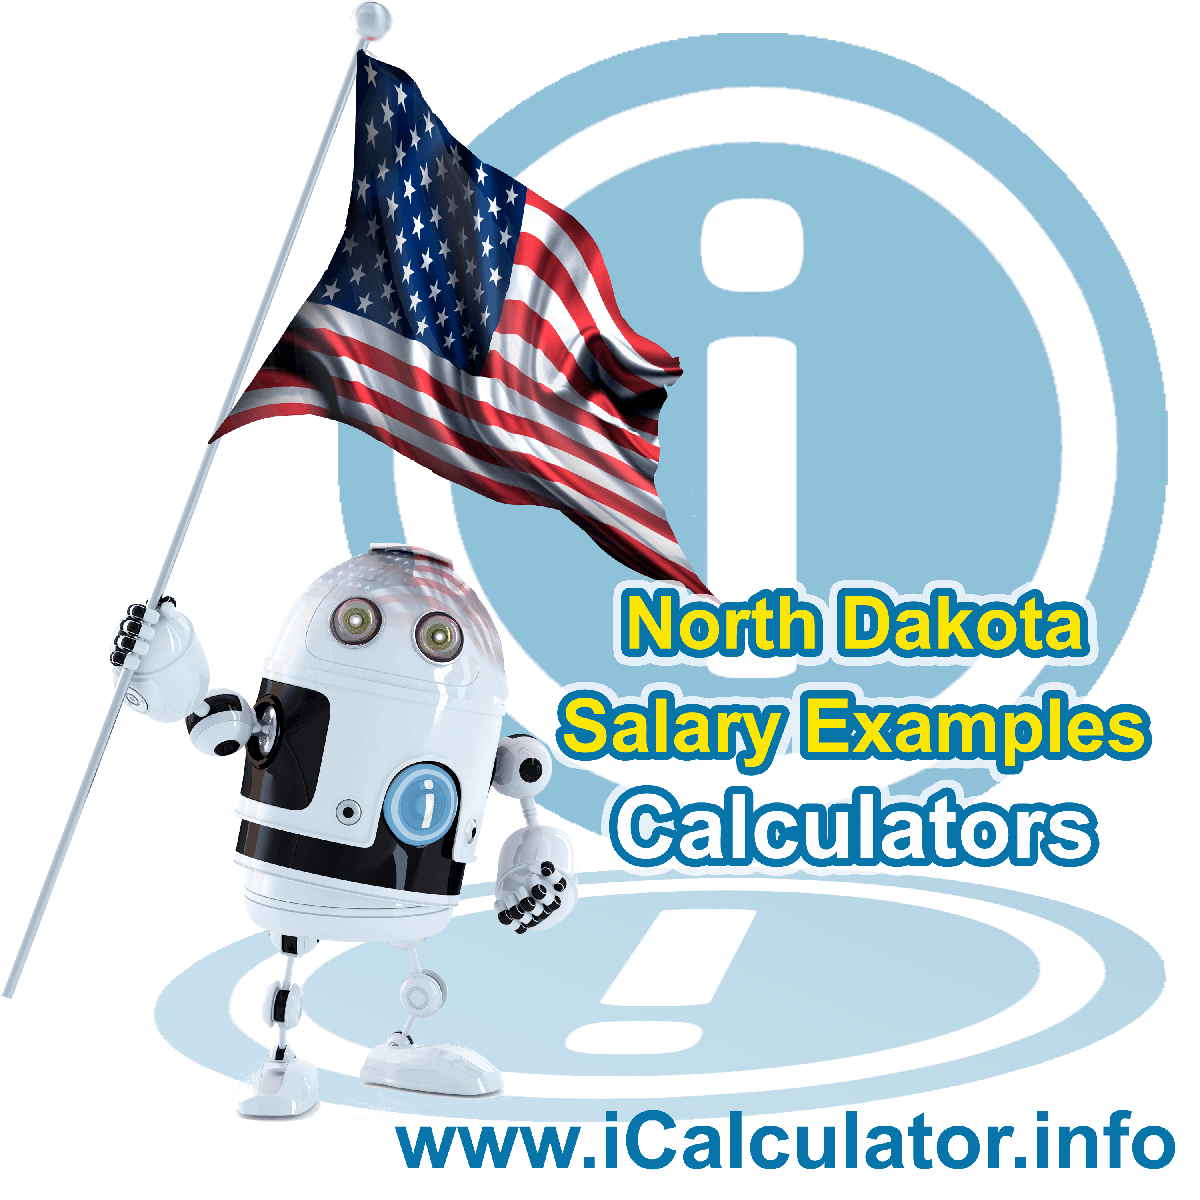 North Dakota Salary Example for $ 250,000.00 in 2023 | iCalculator™ | $ 250,000.00 salary example for employee and employer paying North Dakota State tincome taxes. Detailed salary after tax calculation including North Dakota State Tax, Federal State Tax, Medicare Deductions, Social Security, Capital Gains and other income tax and salary deductions complete with supporting North Dakota state tax tables 